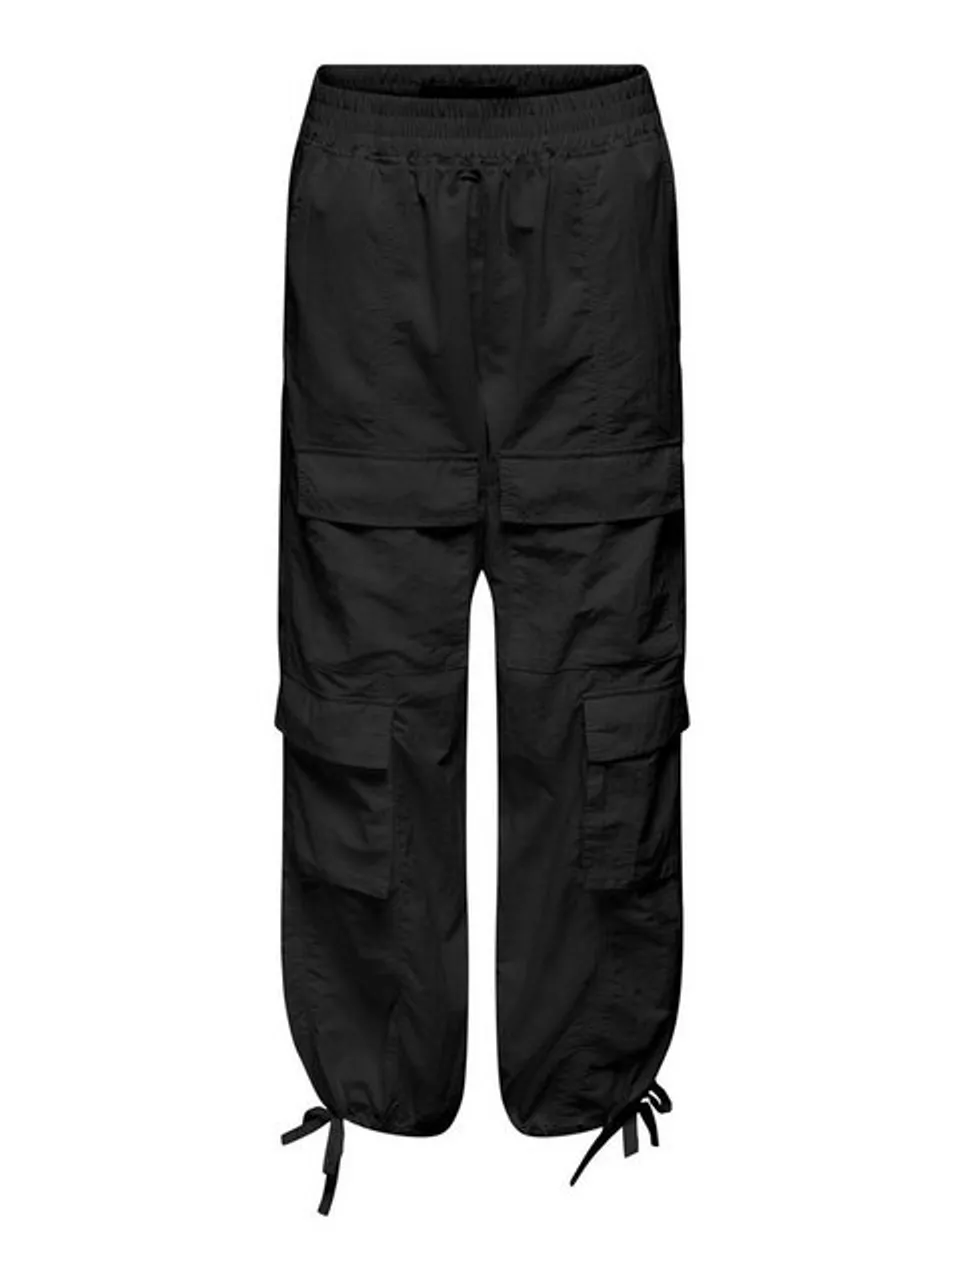 ONLY Stoffhose Cargo Stoffhose Stretch Jogger Pants ONLENIELCA 5211 in Schwarz-2